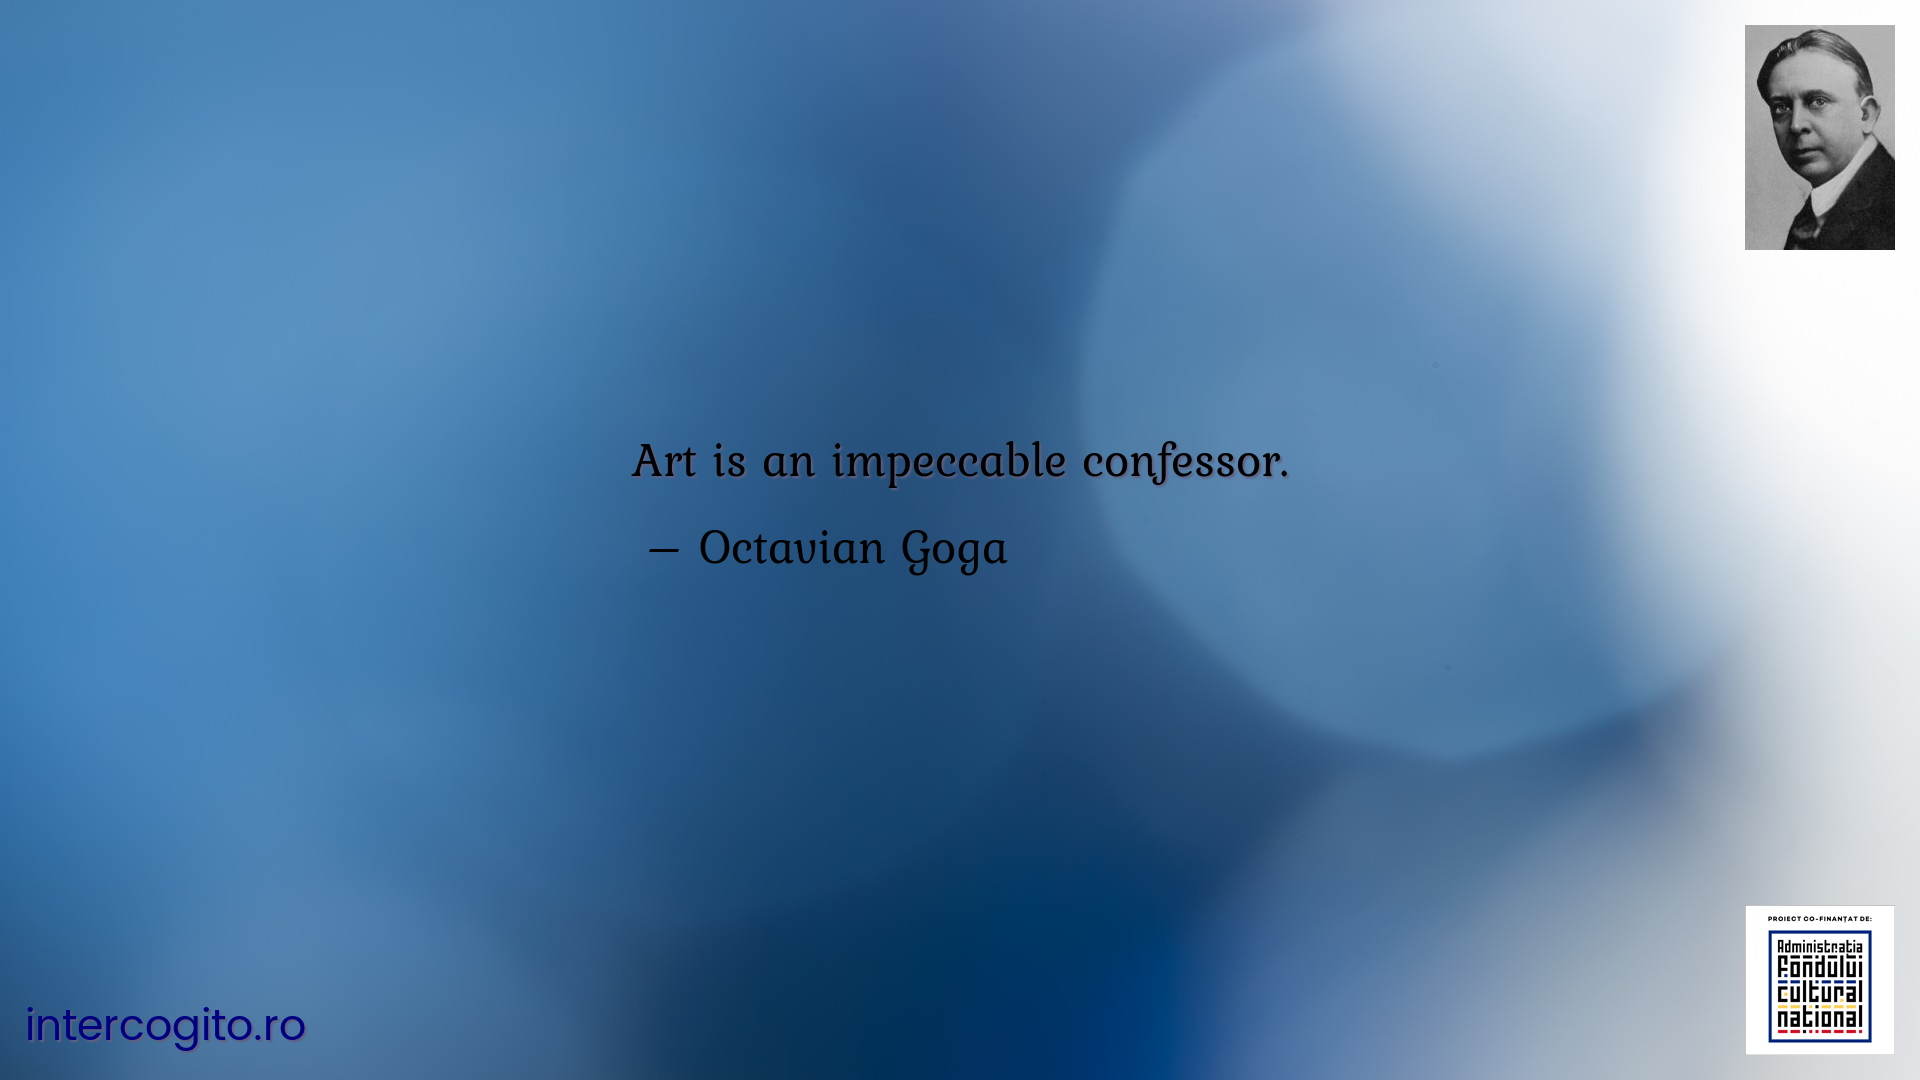 Art is an impeccable confessor.